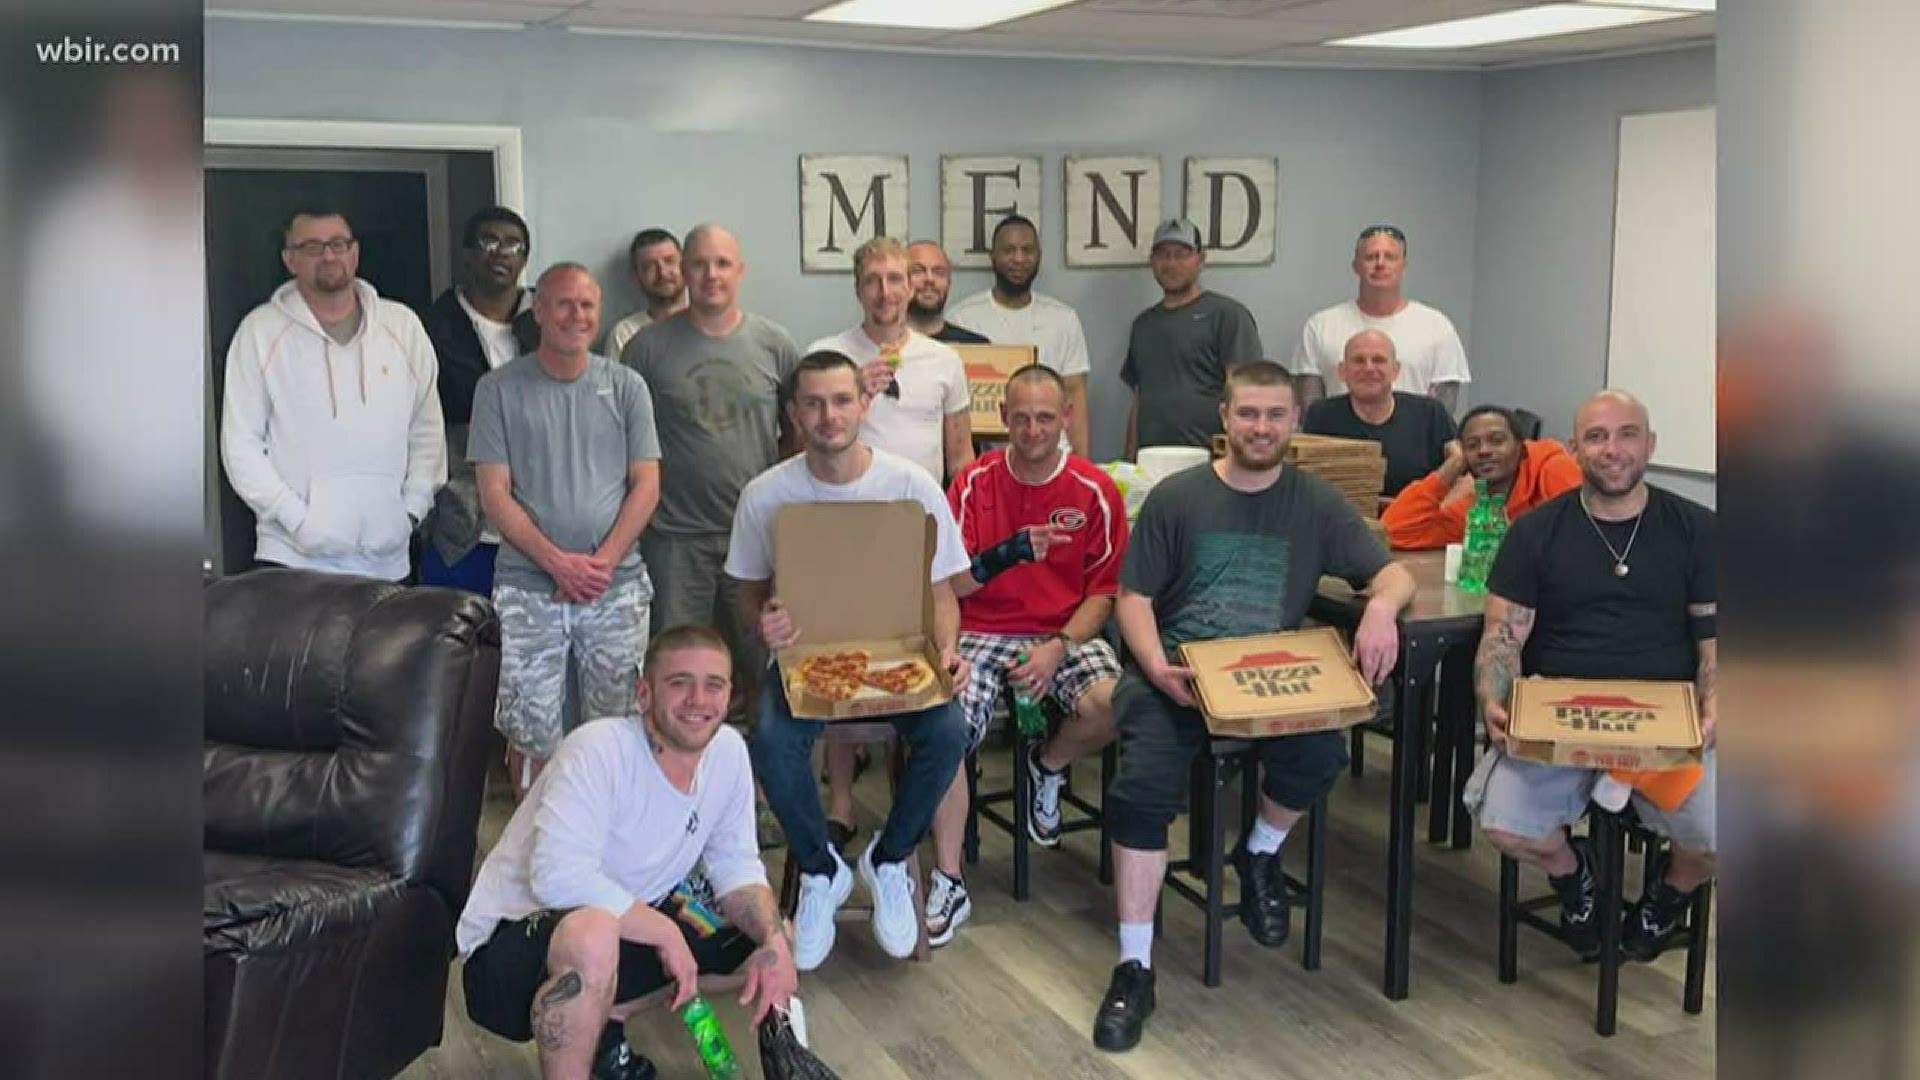 Preston Arnwine with Pizza Hut fed some 25 men who are getting treatment at the Mend House, a sober living community in Knoxville.